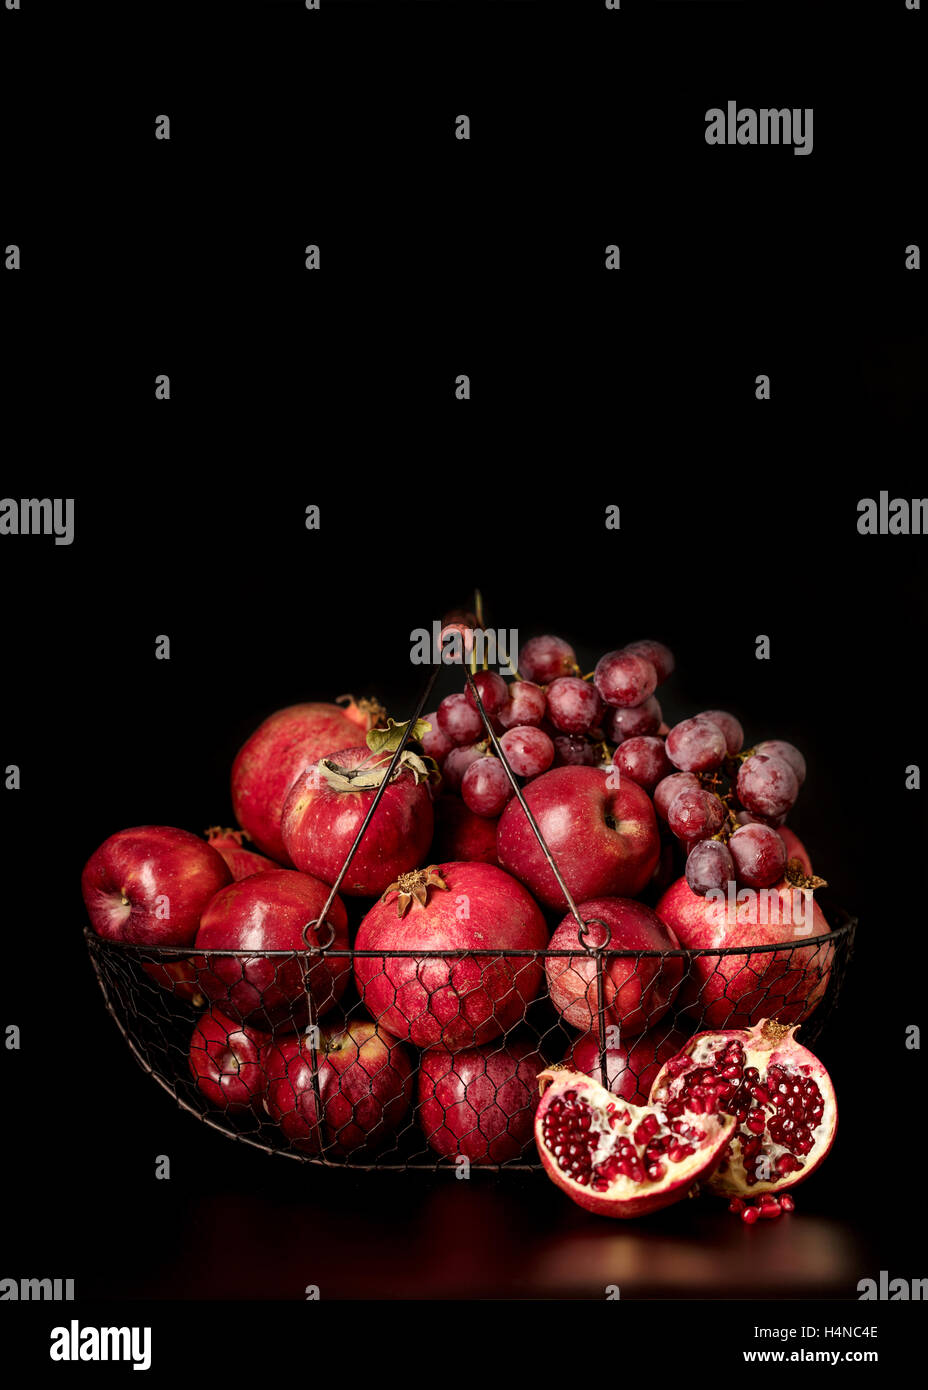 Still life on a dark background. Fruits and berries (apples, pomegranates and grapes) in the basket. Stock Photo